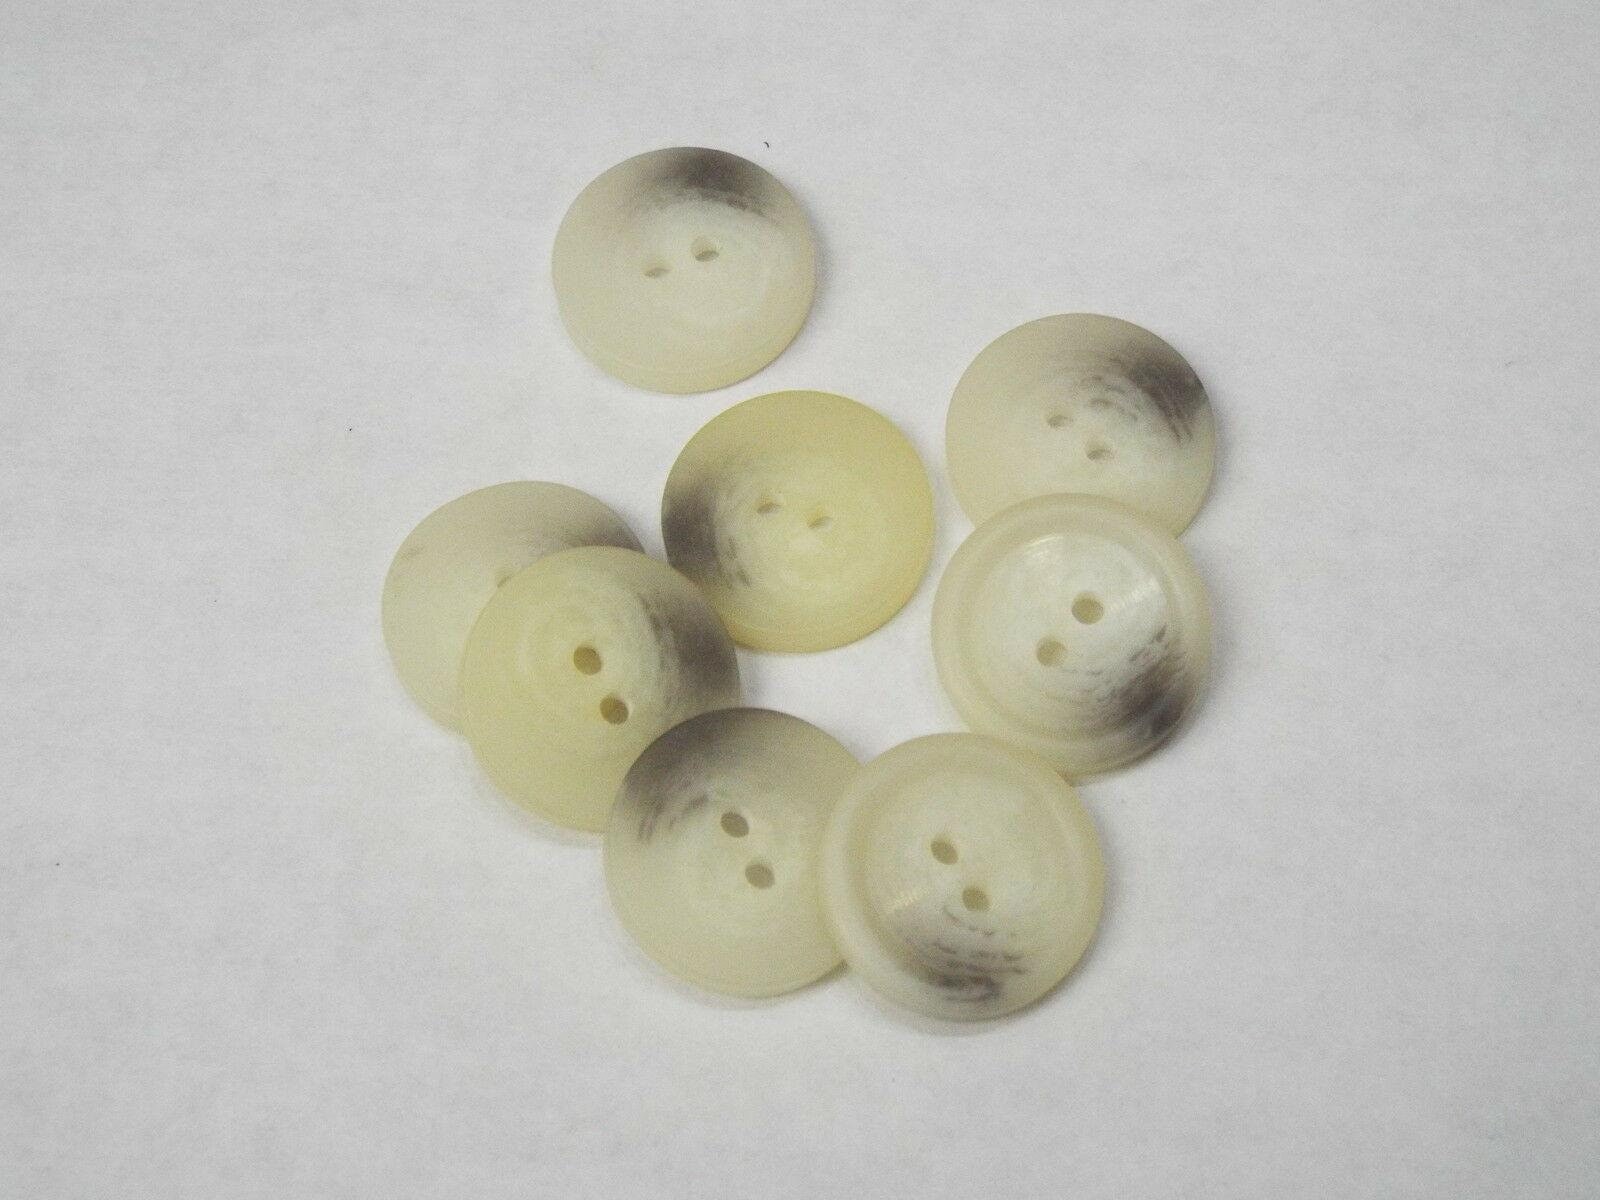 8pc 20mm Slate Grey Faux Stone Effect Square Cardigan Kids Baby Button Bead 2967 